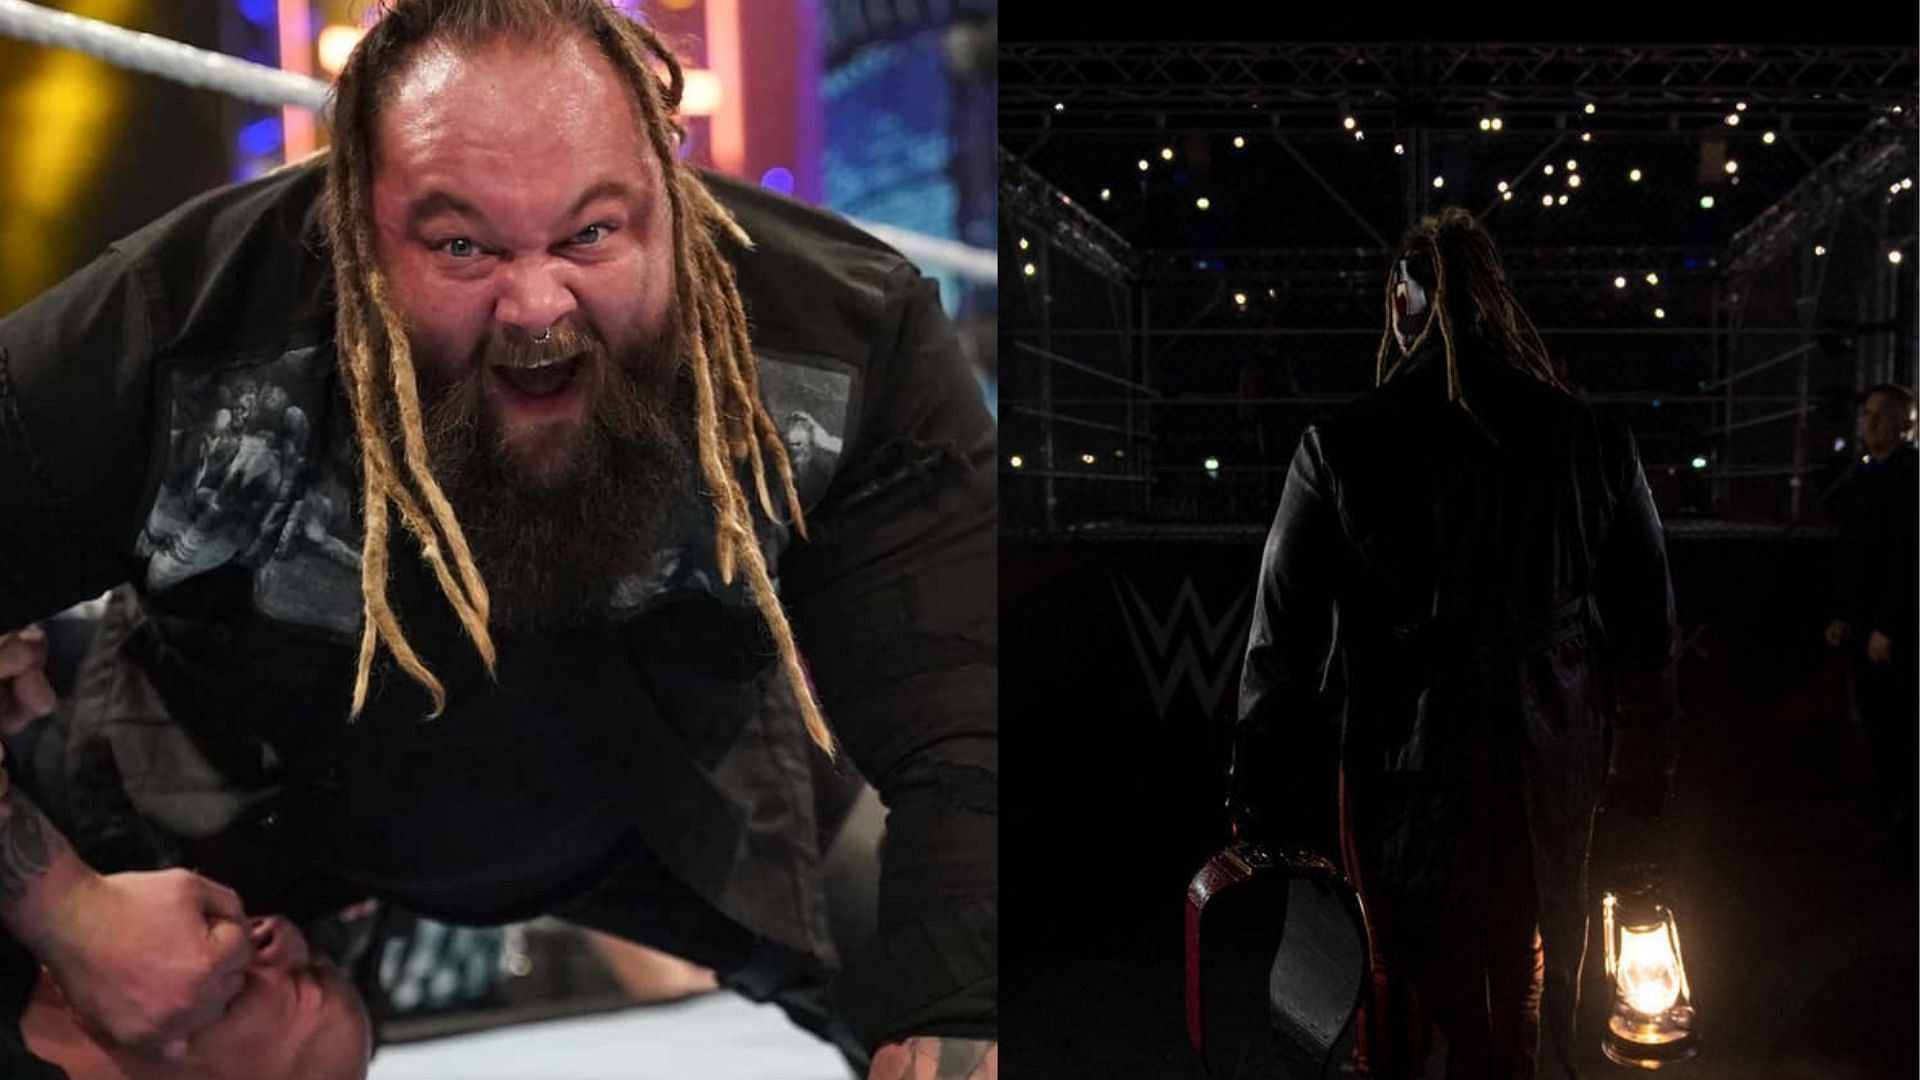 Could Bray Wyatt return in WWE with somebody else?